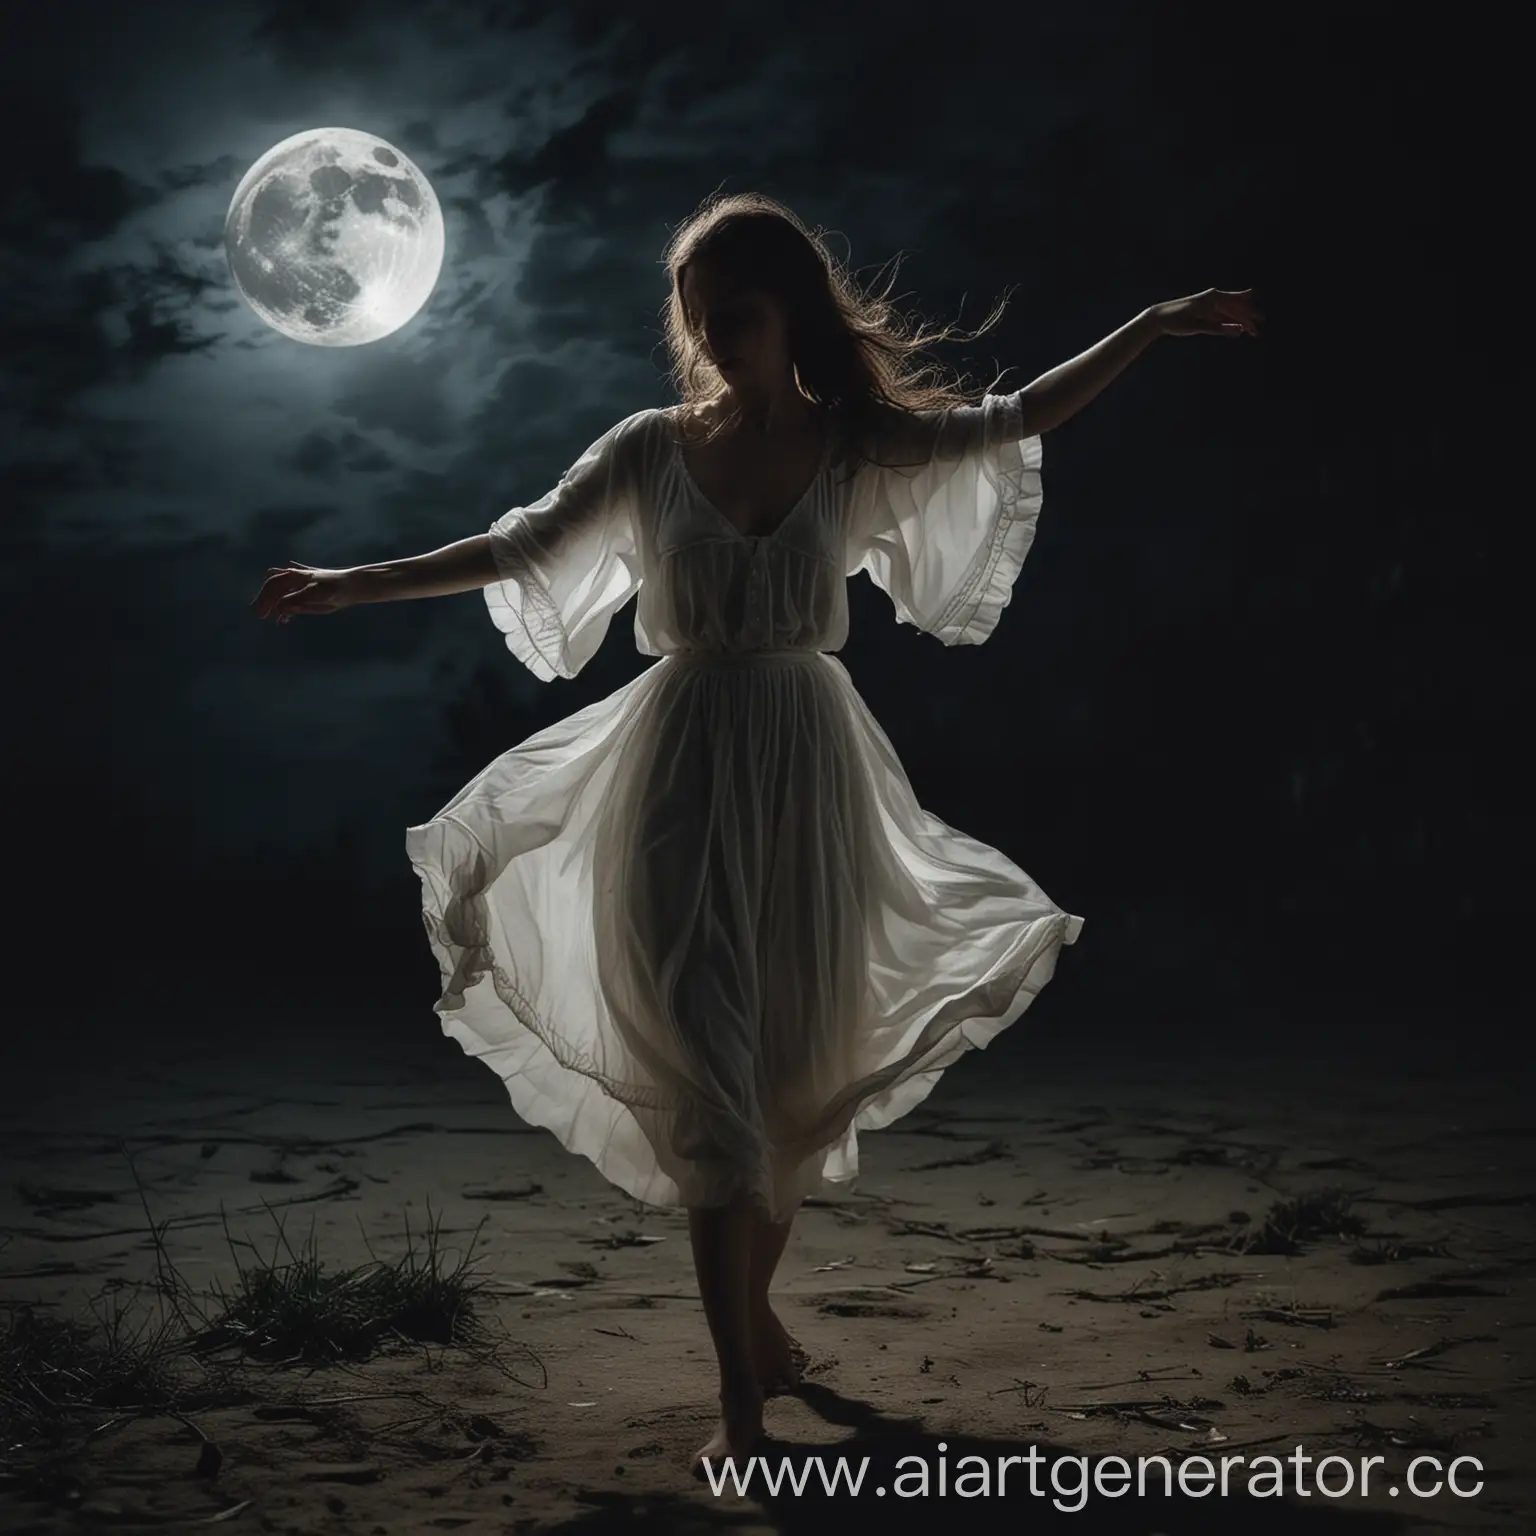 Ethereal-Night-Dance-Mesmerizing-Girl-Amidst-Moonlight-and-Fragments-of-Life